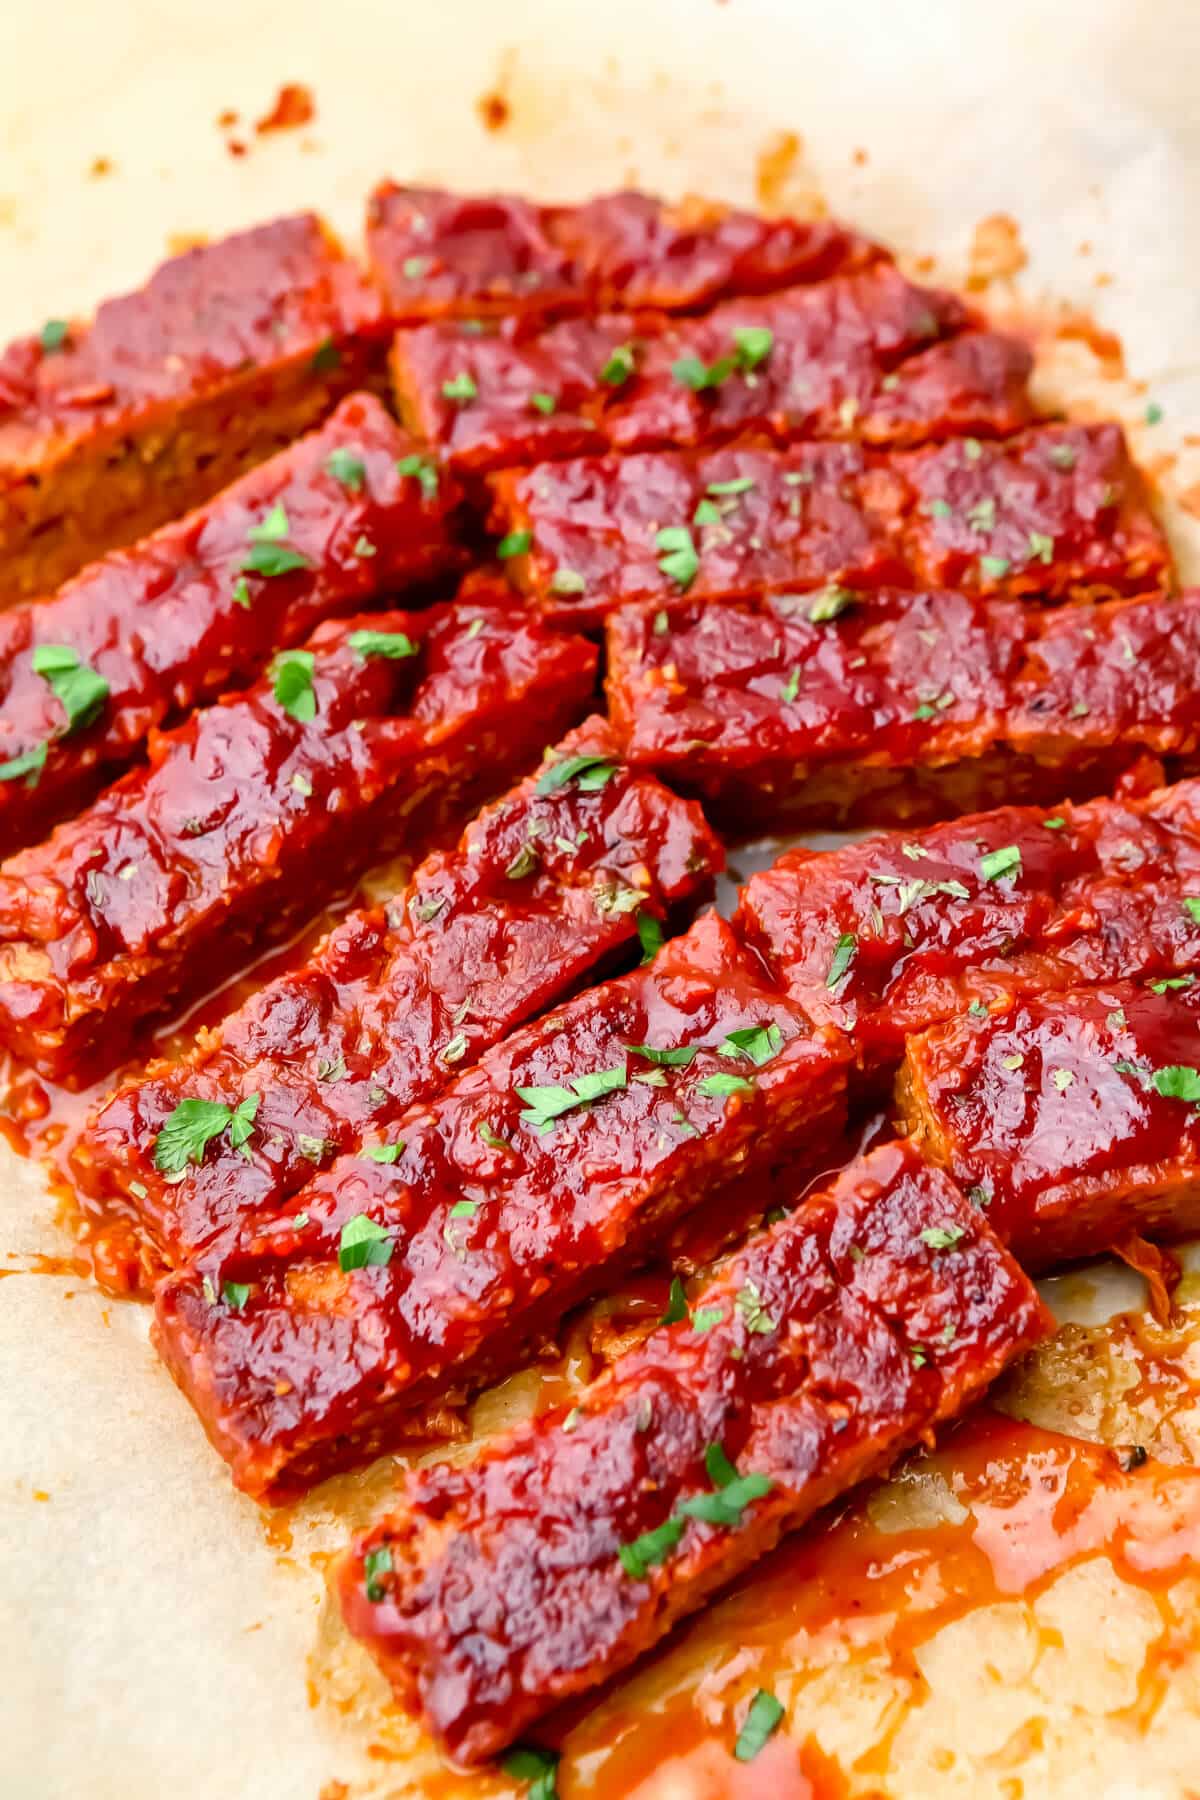 Vegan ribs made from seitan with BBQ sauce on them and sprinkled with parsley.